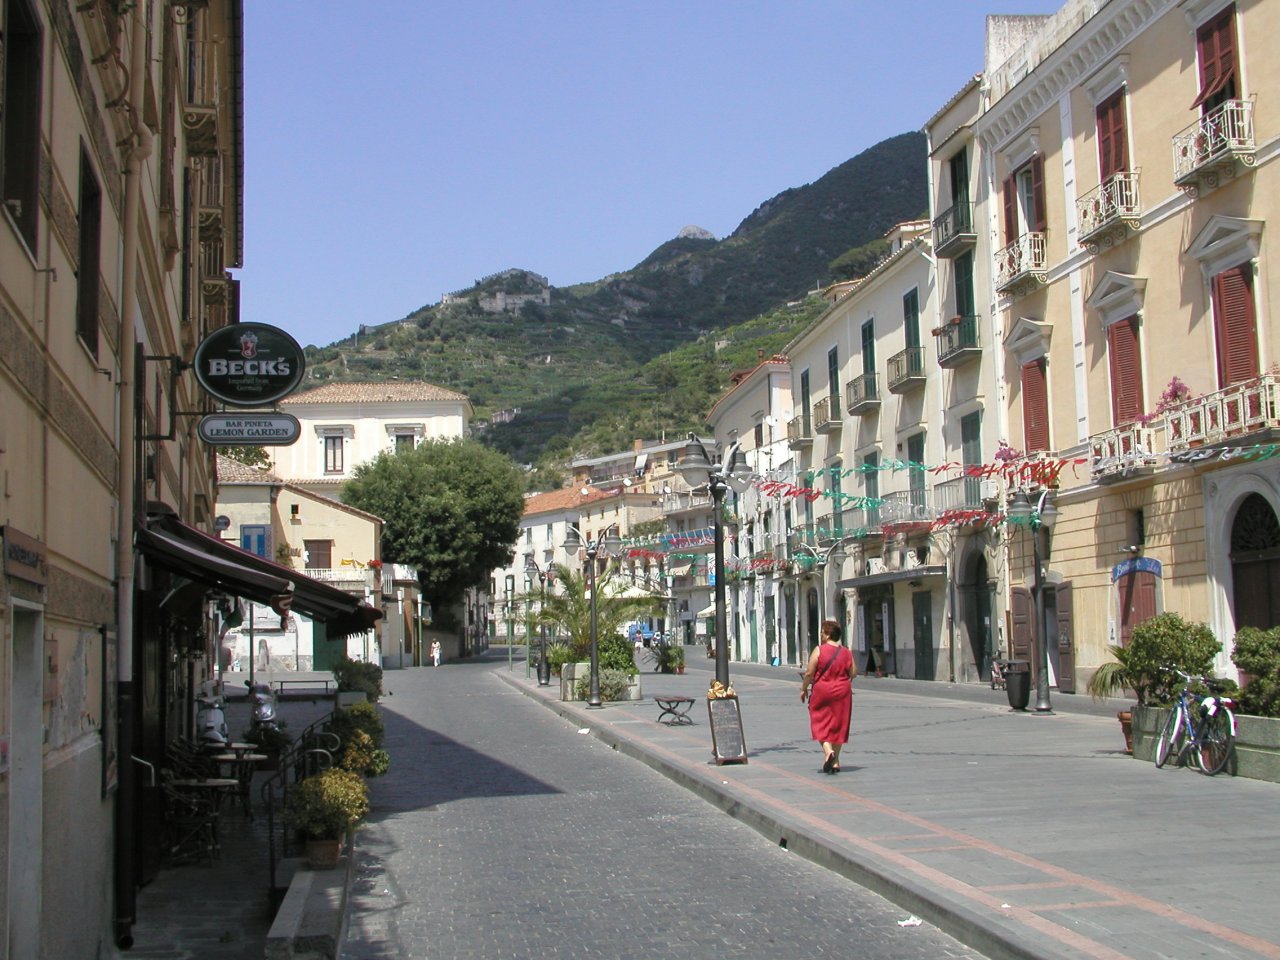 JPEG image - Maiori: the main street, almost abandoned in the midday heat. Early morning and late into the evening it is really busy, shops open until 11pm - or later? ...